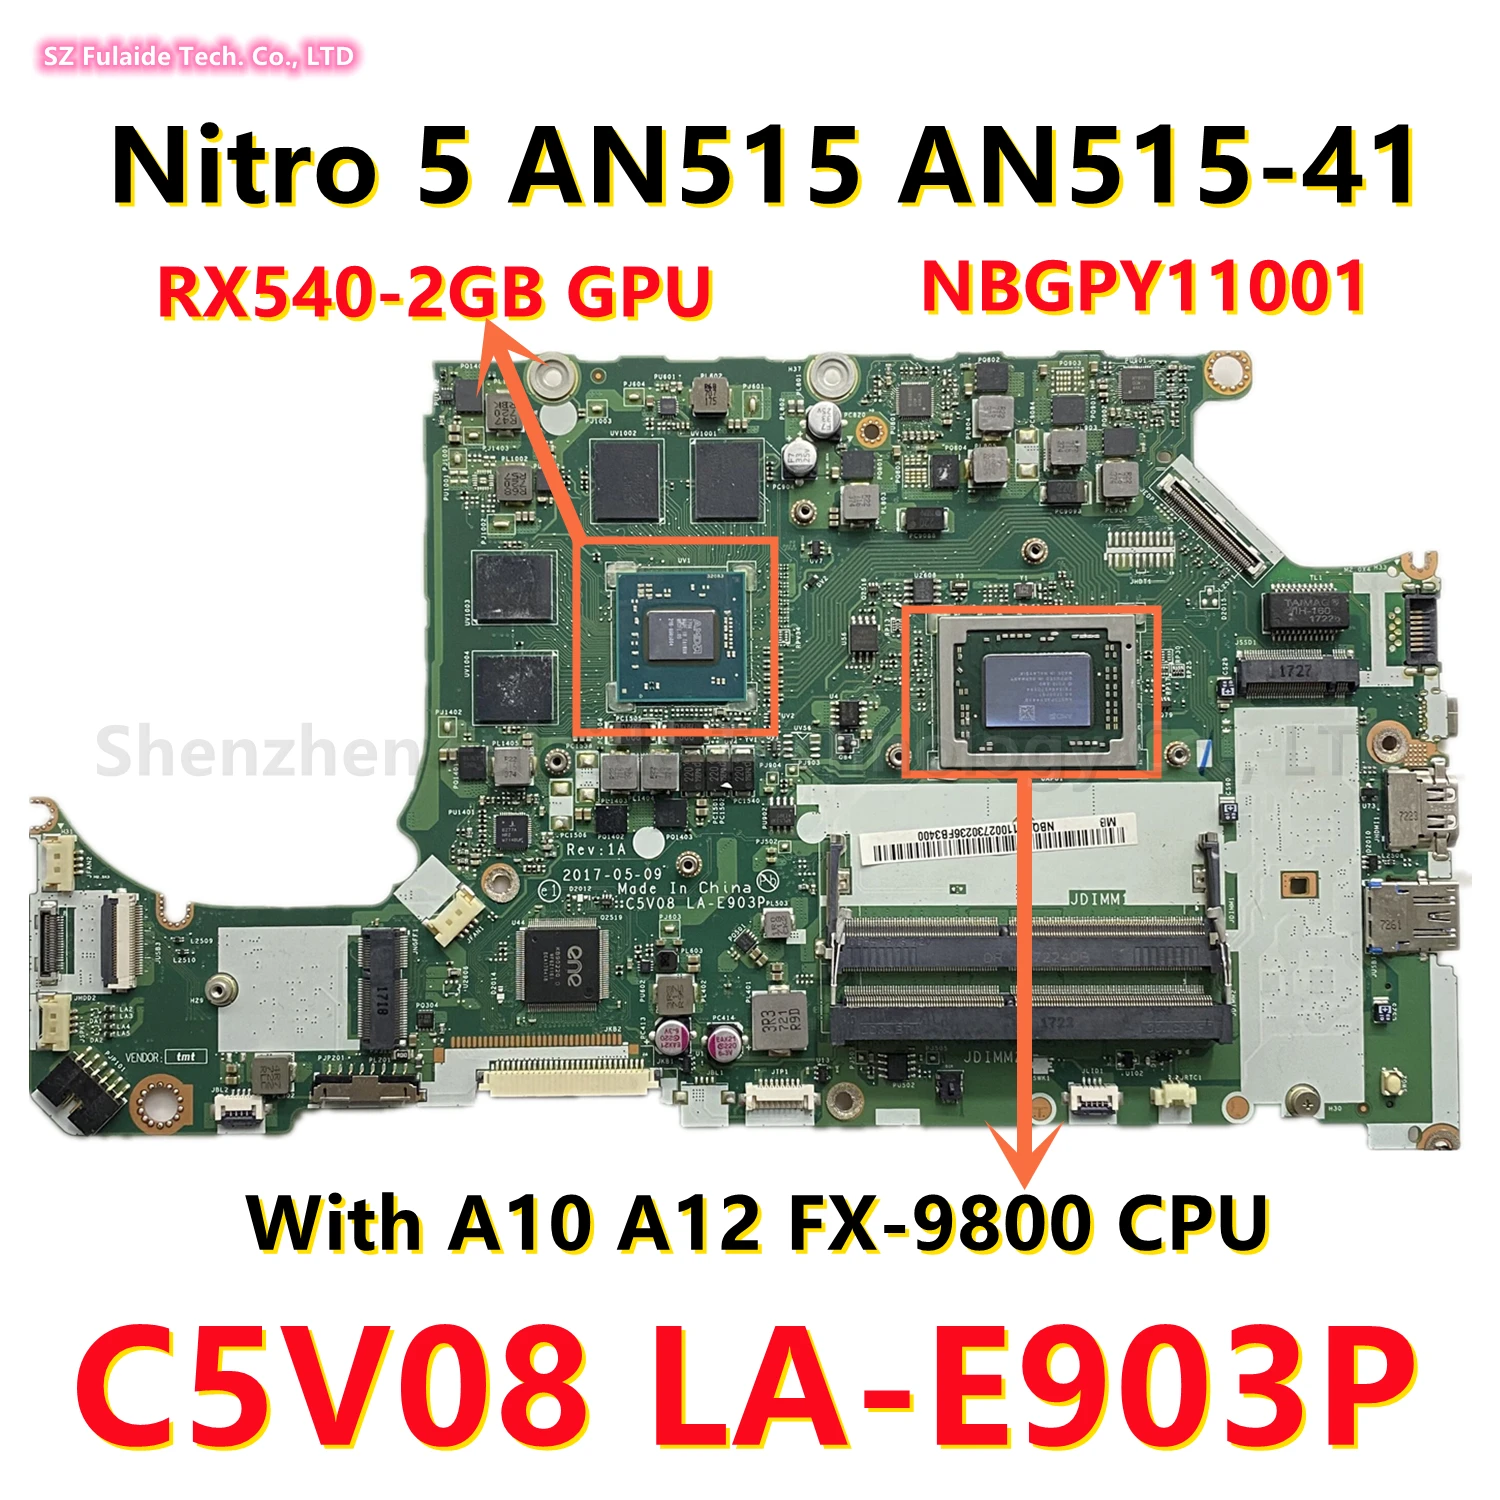 

C5V08 LA-E903P For ACER Nitro 5 AN515 AN515-41 Laptop Motherboard With A10 A12 FX-9800 CPU RX540 2GB GPU NBGPY11001 Mainboard